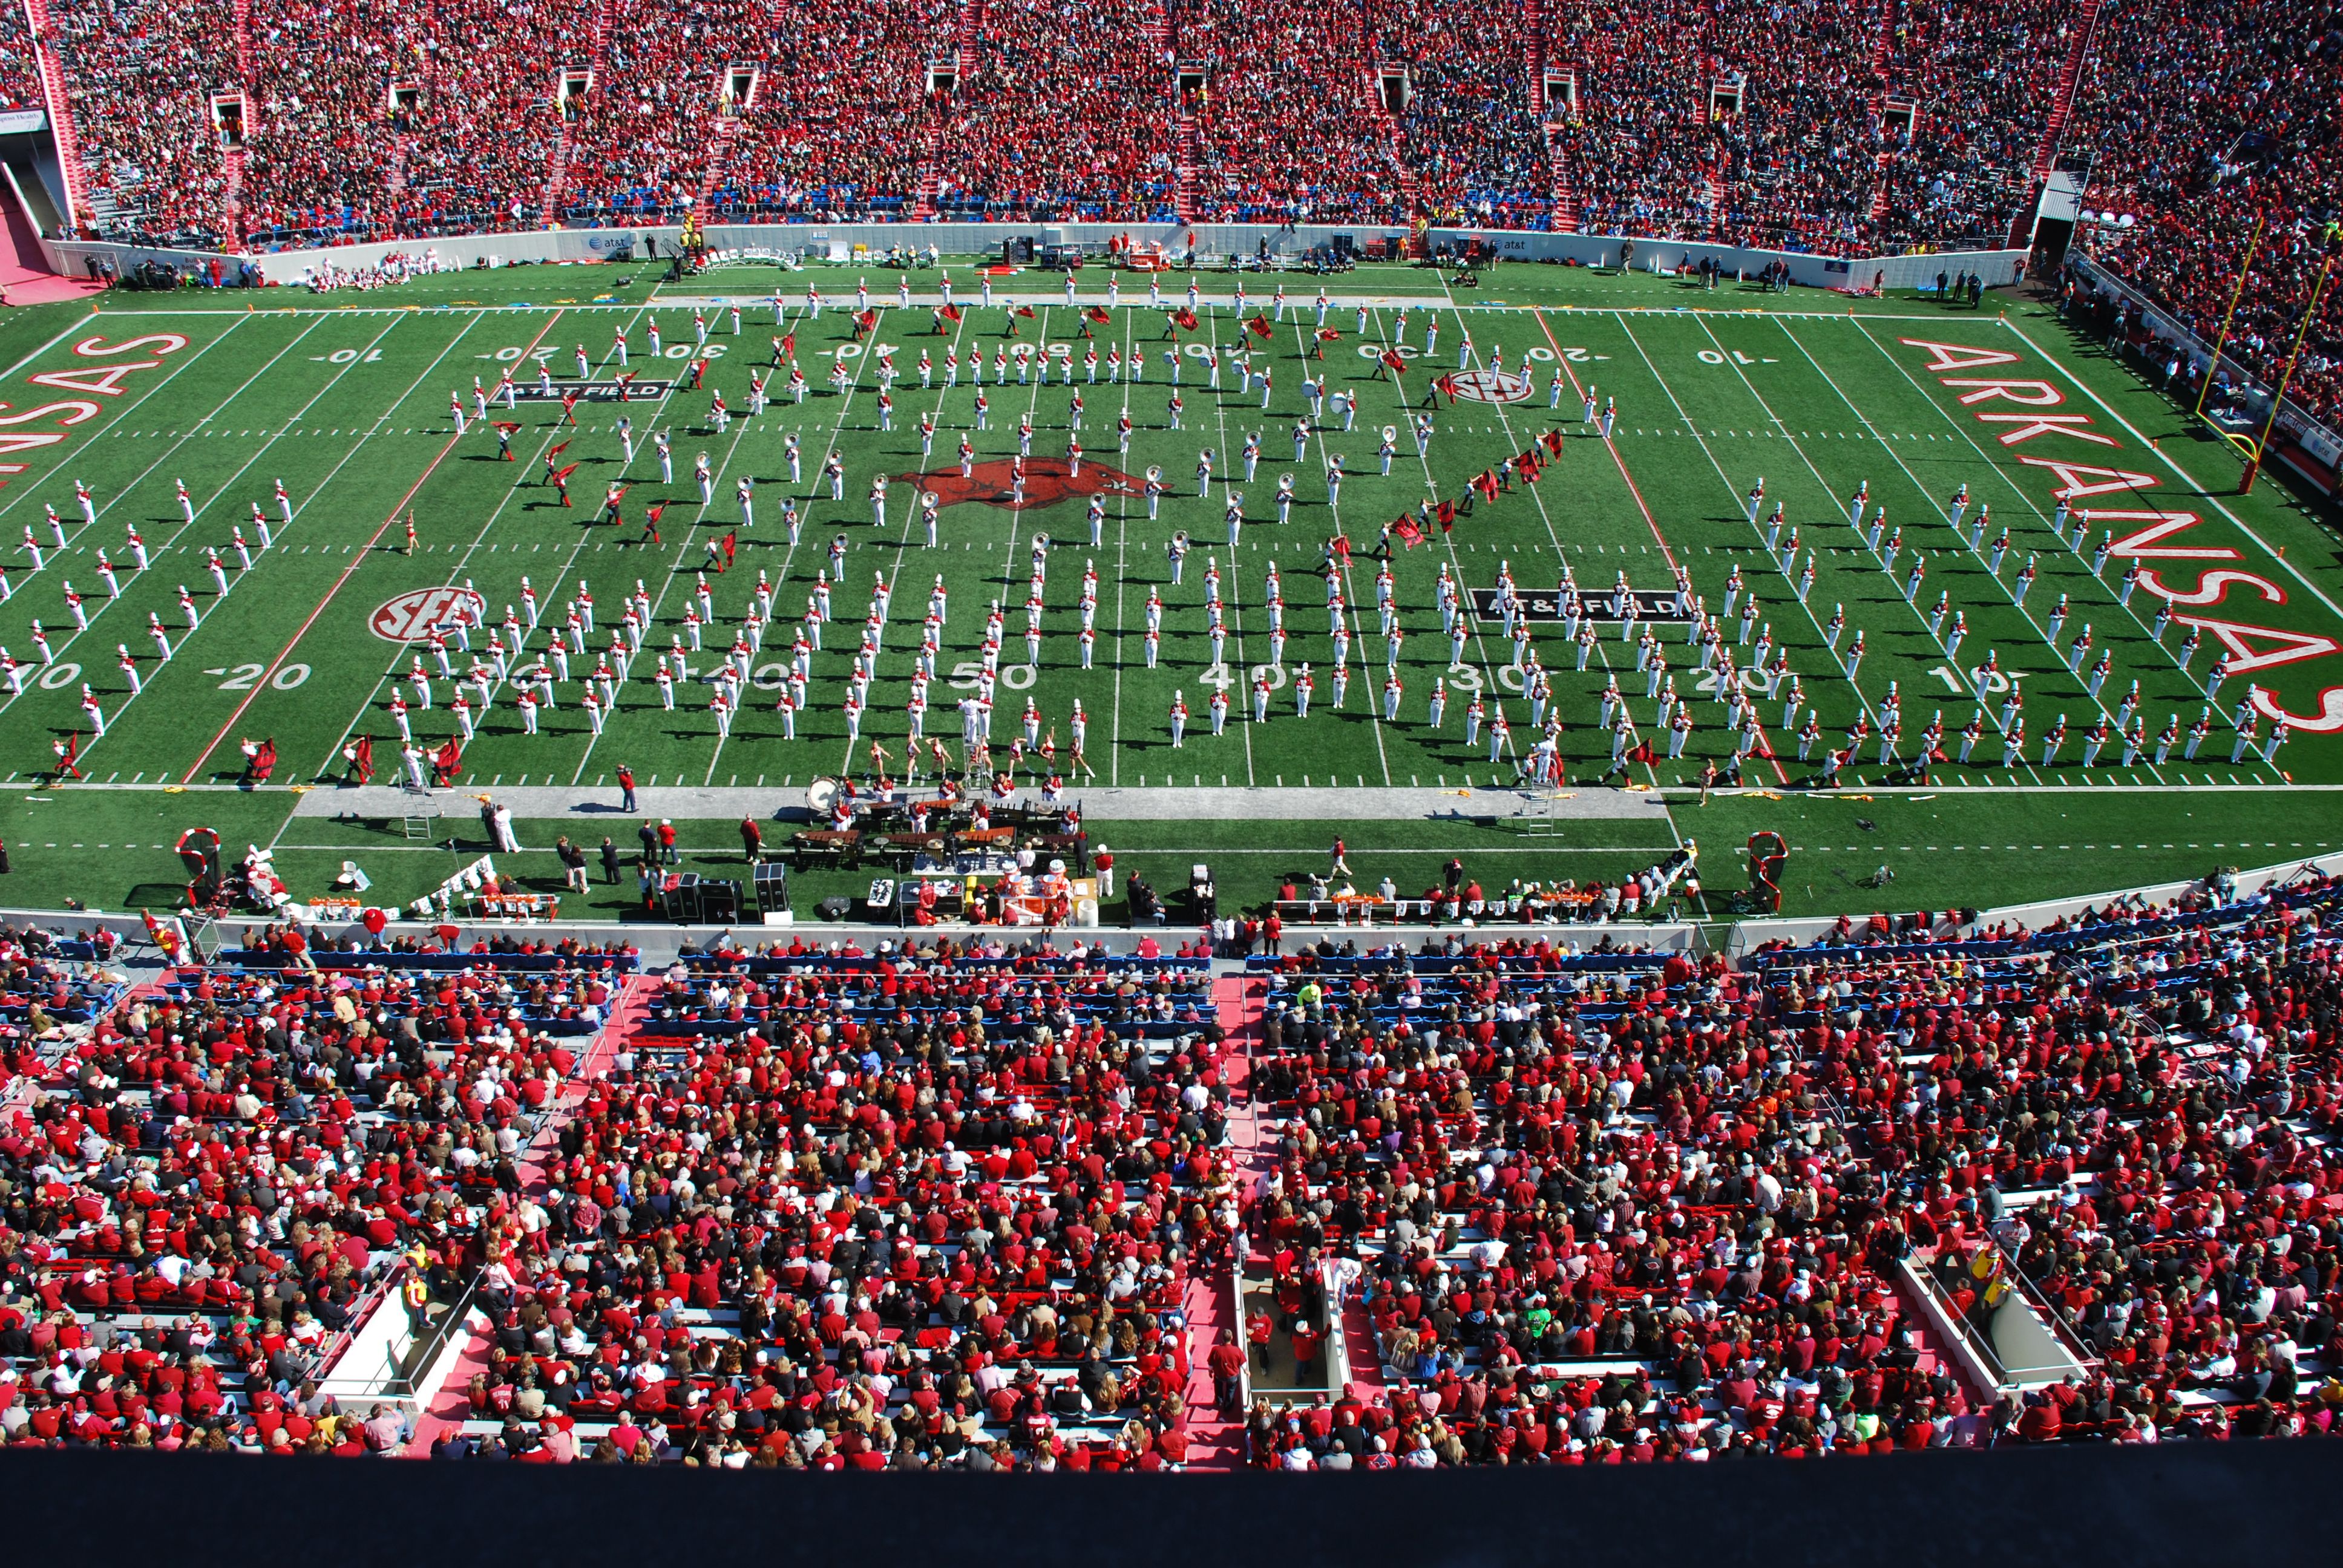 Razorback Marching Band Presents Beatles Show at First Three Home Games